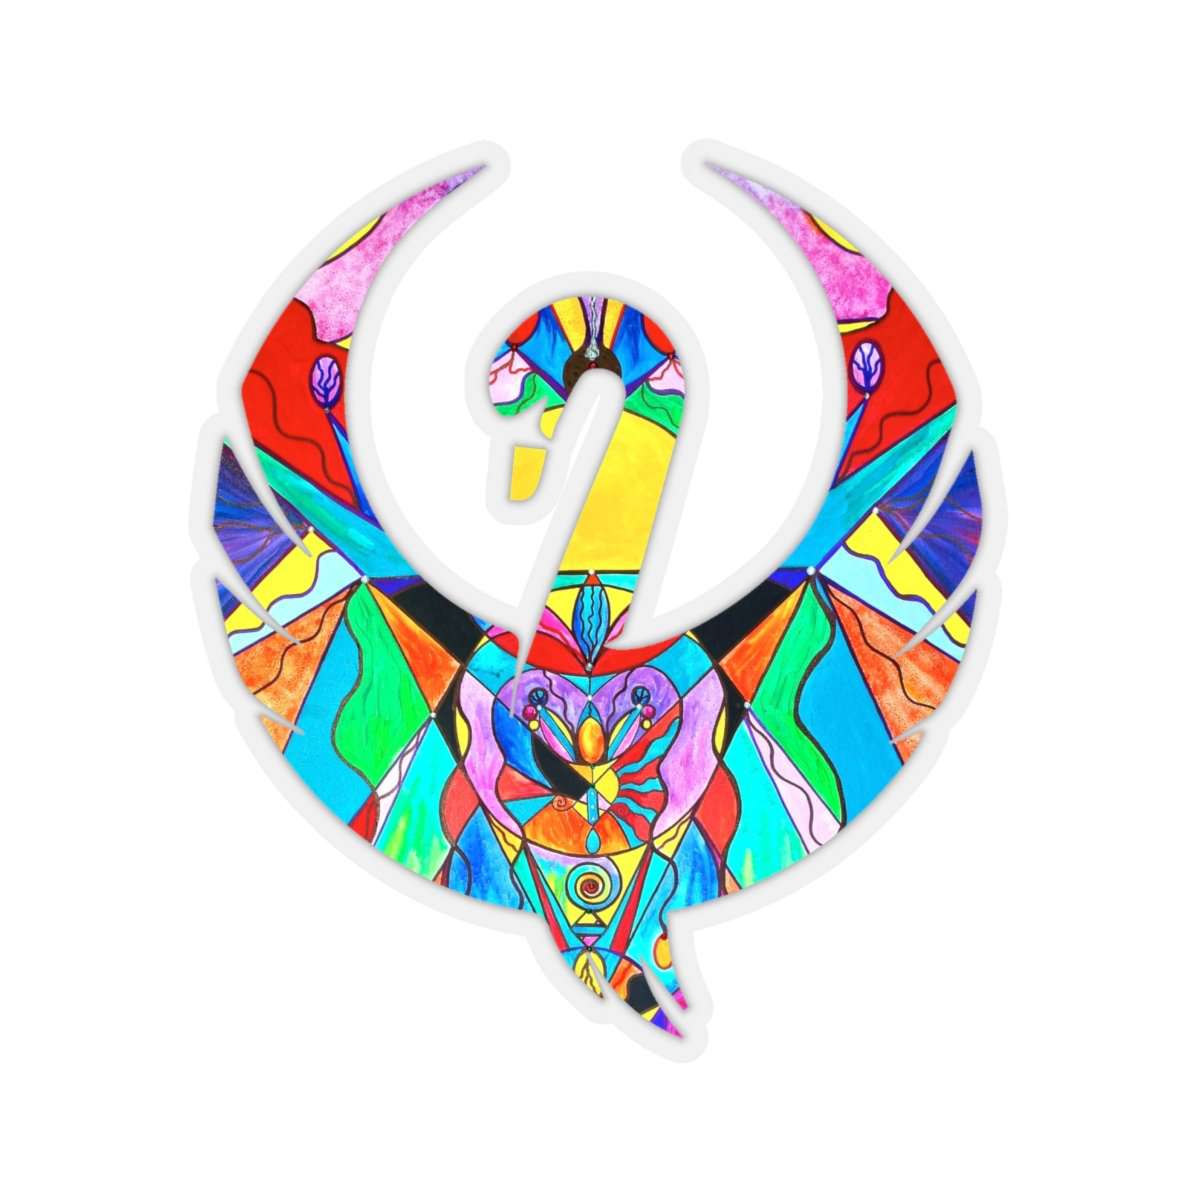 we-are-the-best-place-to-shop-arcturian-metamorphosis-grid-swan-stickers-sale_0.jpg